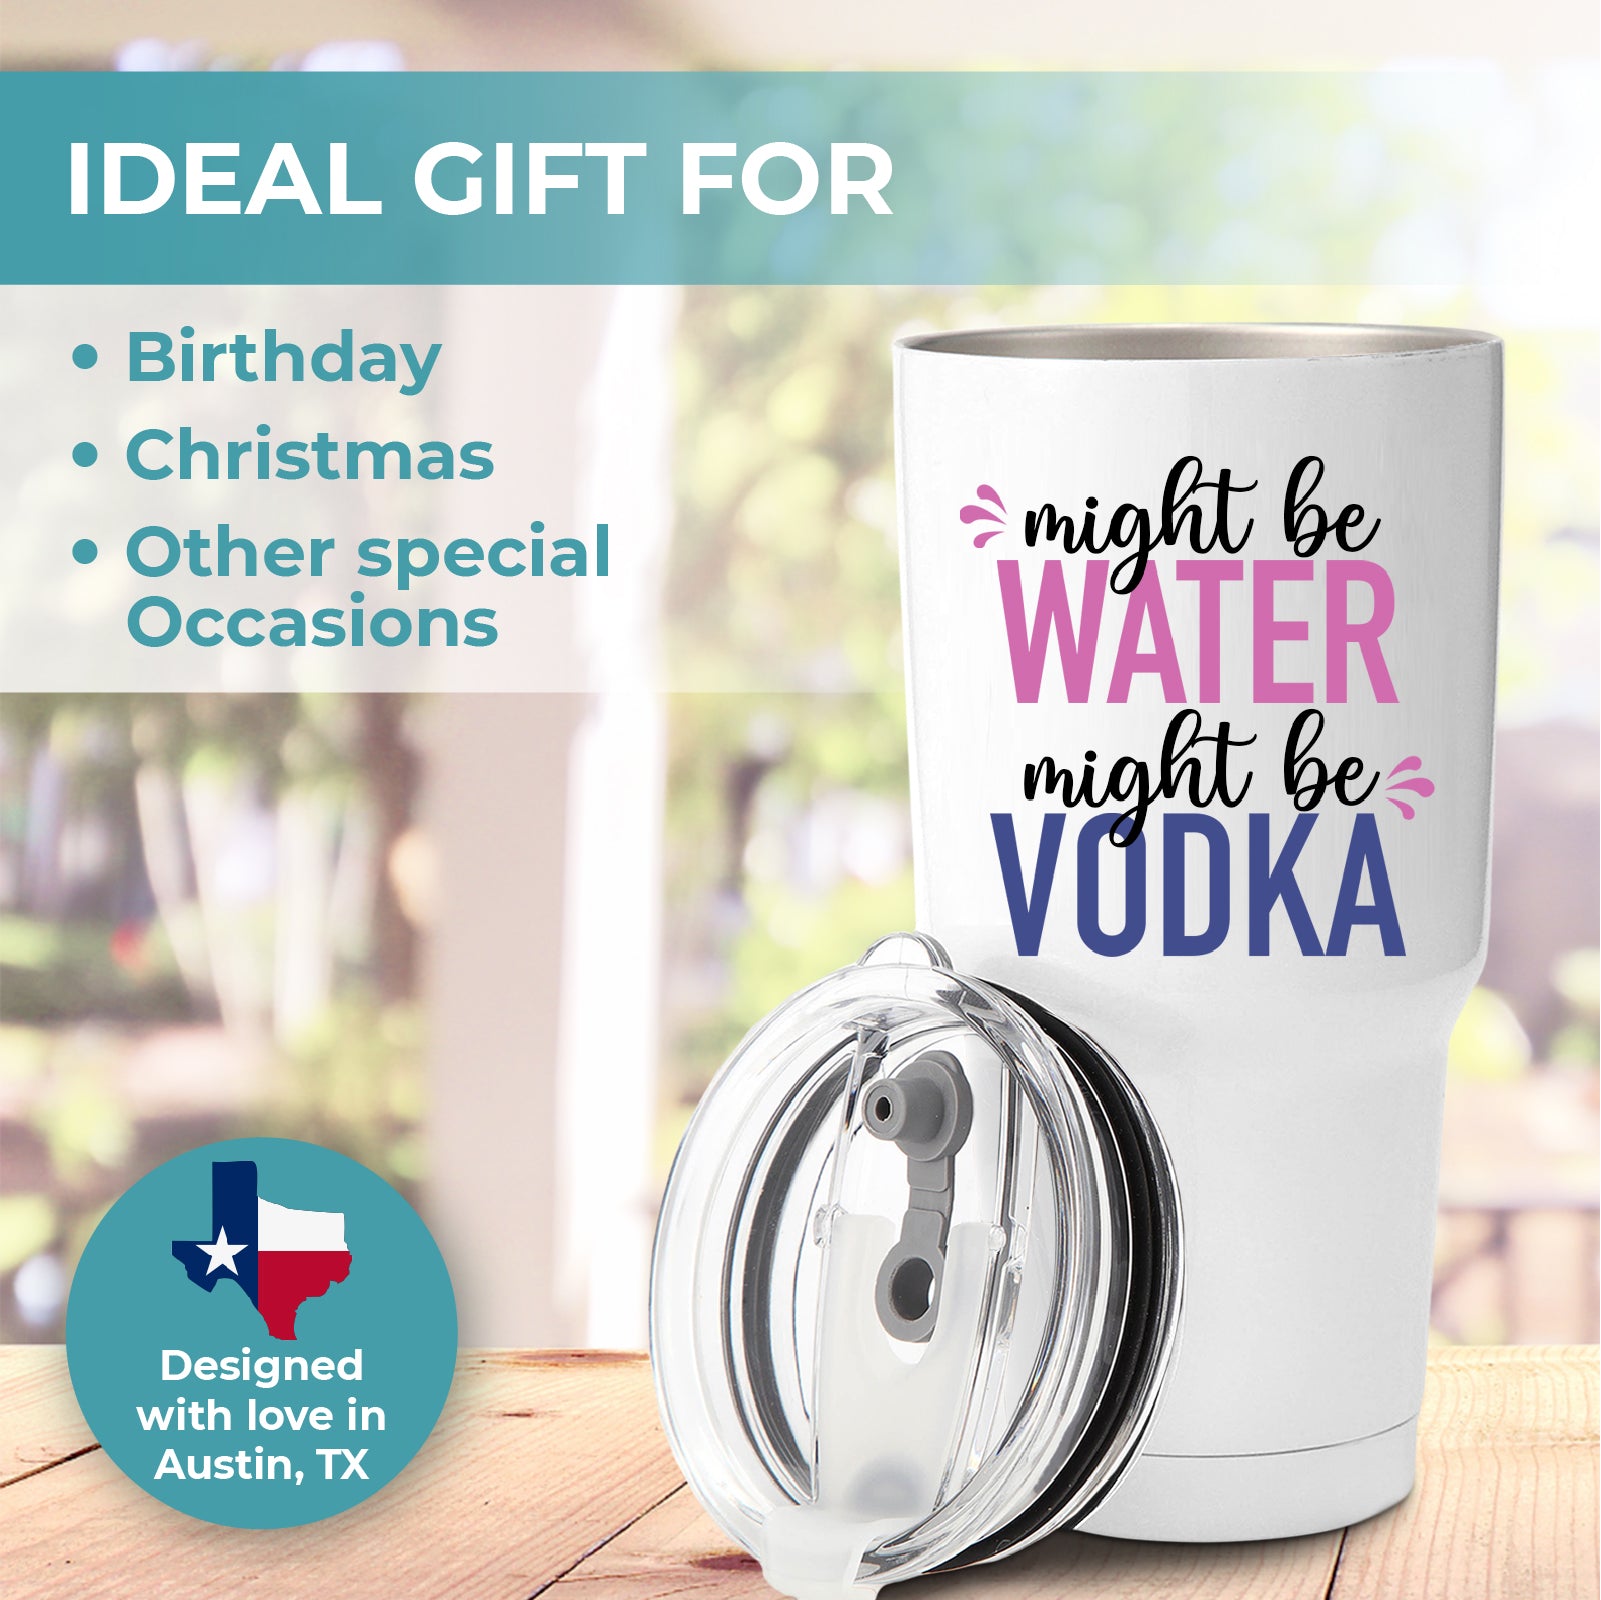 Best Vodka Gifts to Buy Your Loved One This Christmas - Thrillist